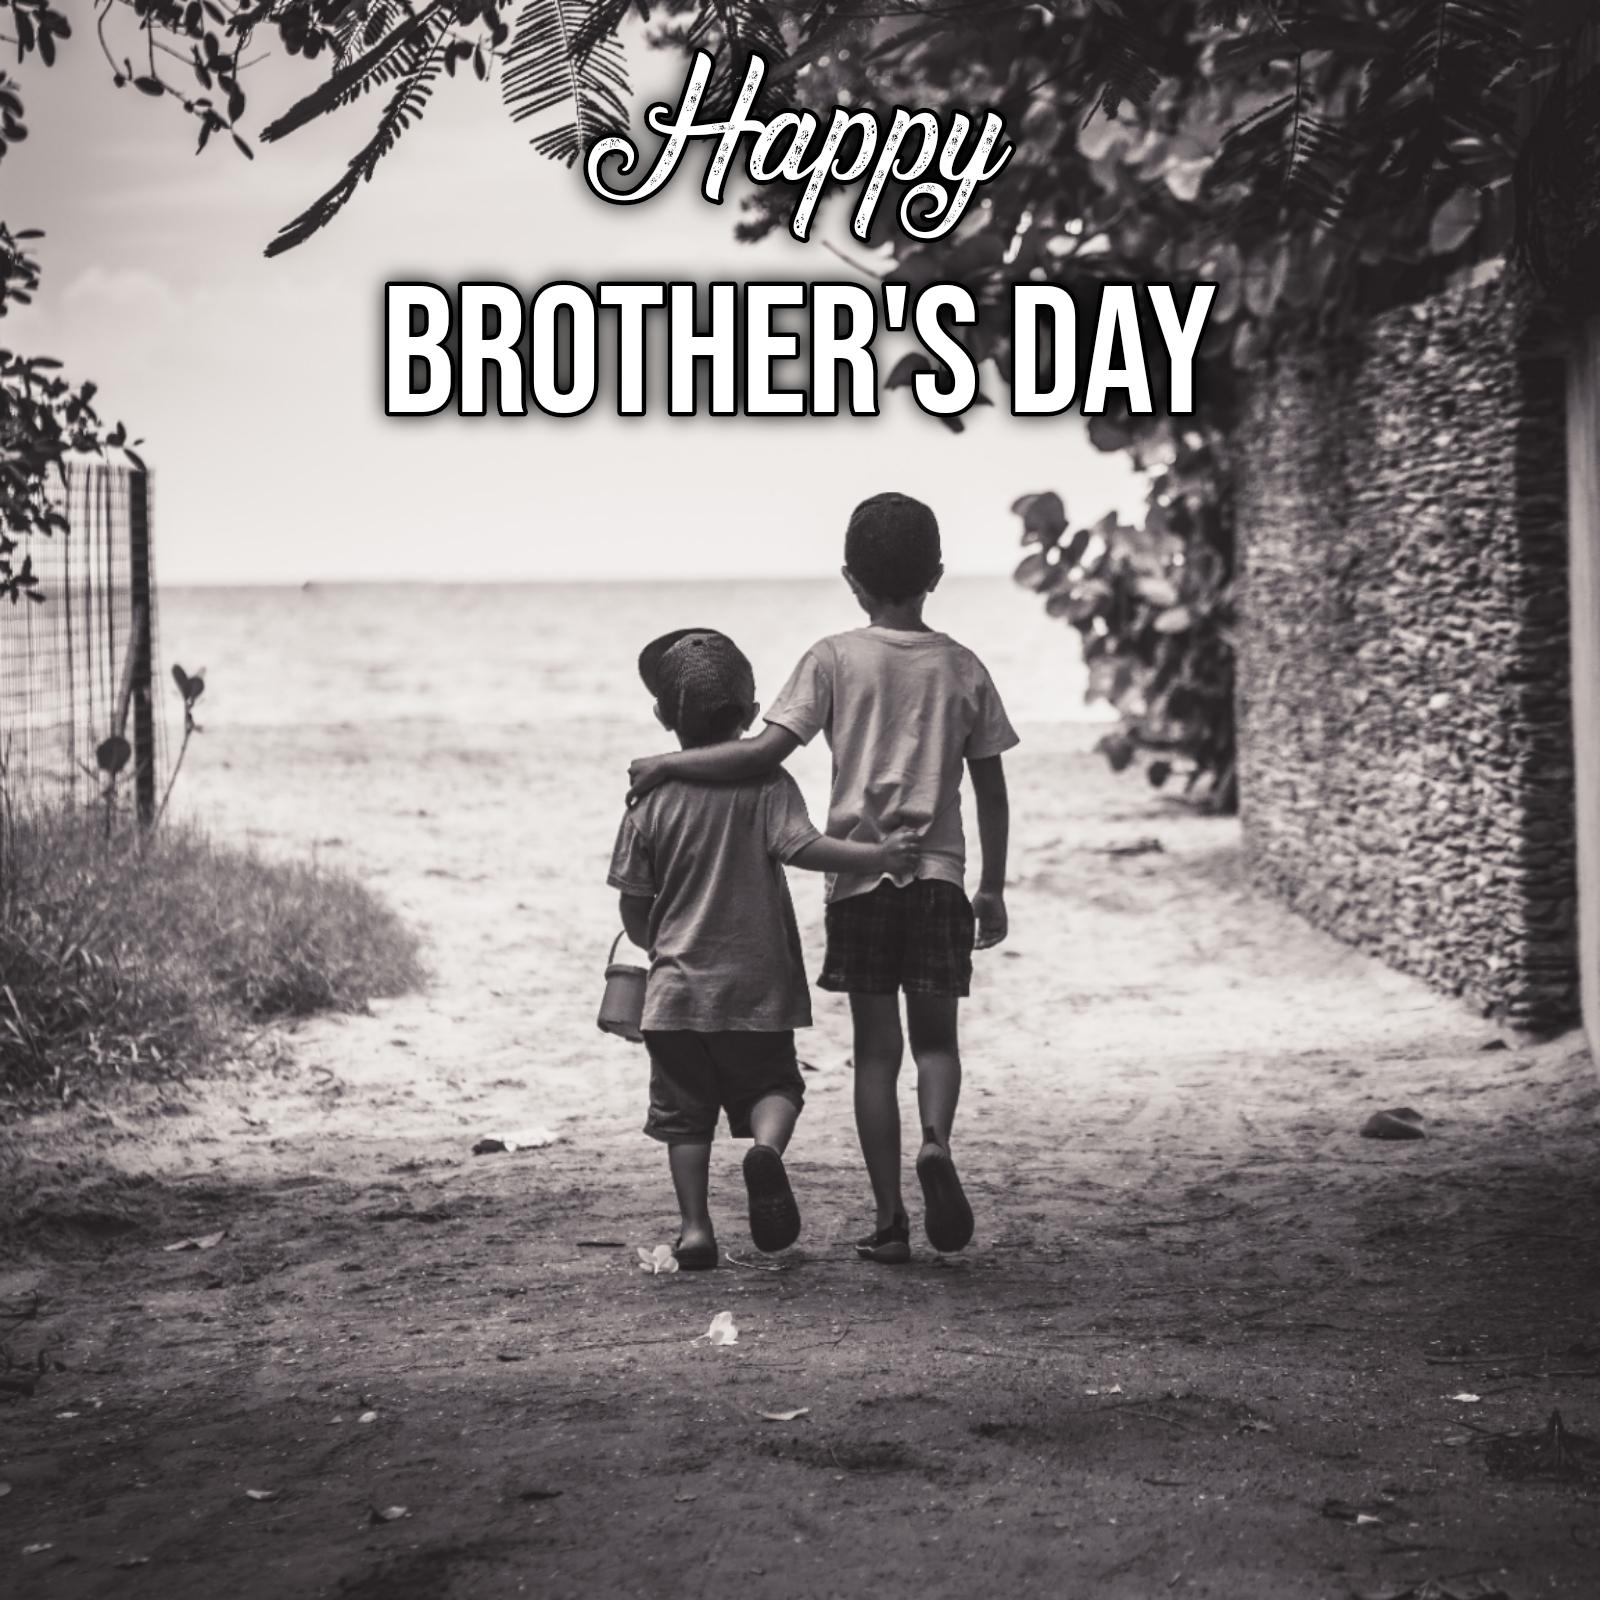 Happy Brothers Day Images For Whatsapp